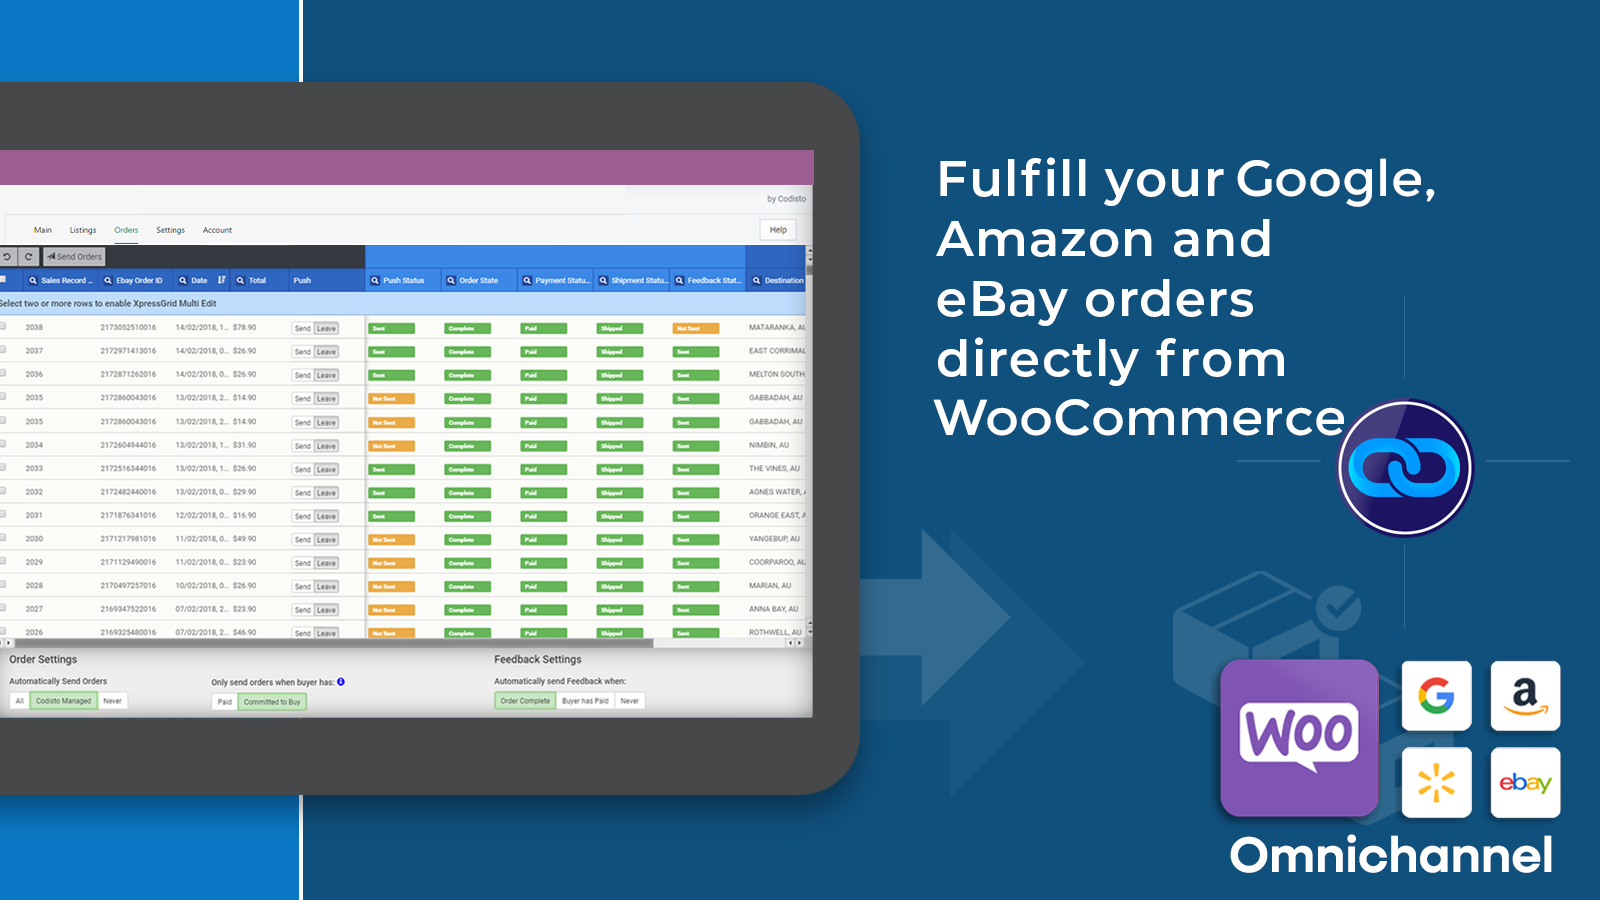 Fulfill your Google, Amazon and eBay orders directly from WooCommerce